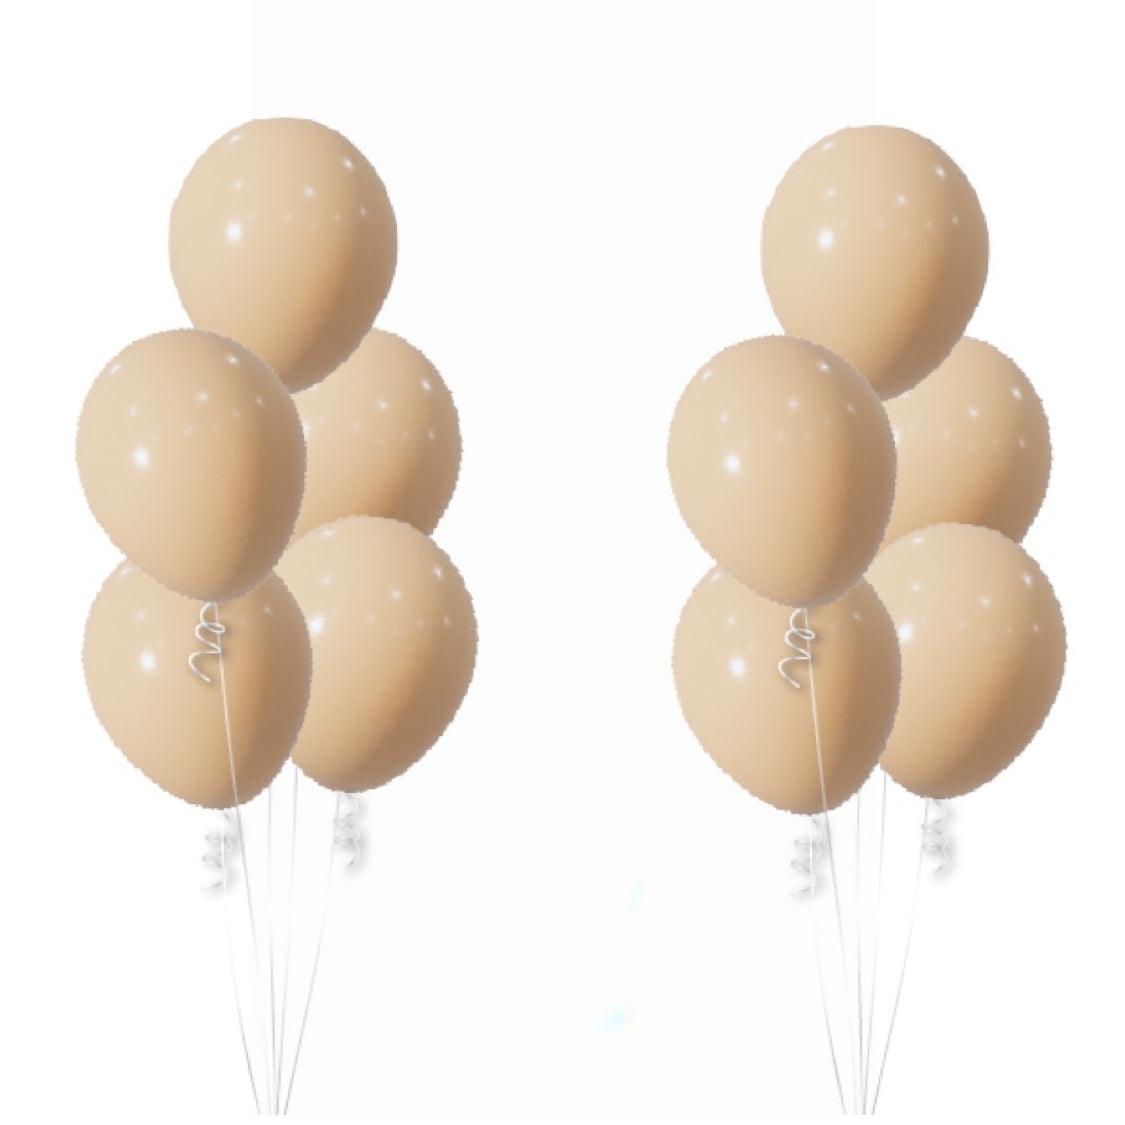 Hollywood Sand Nude Colour Scheme helium filled latex balloon 2 bouquets of 5 - ONE UP BALLOONS